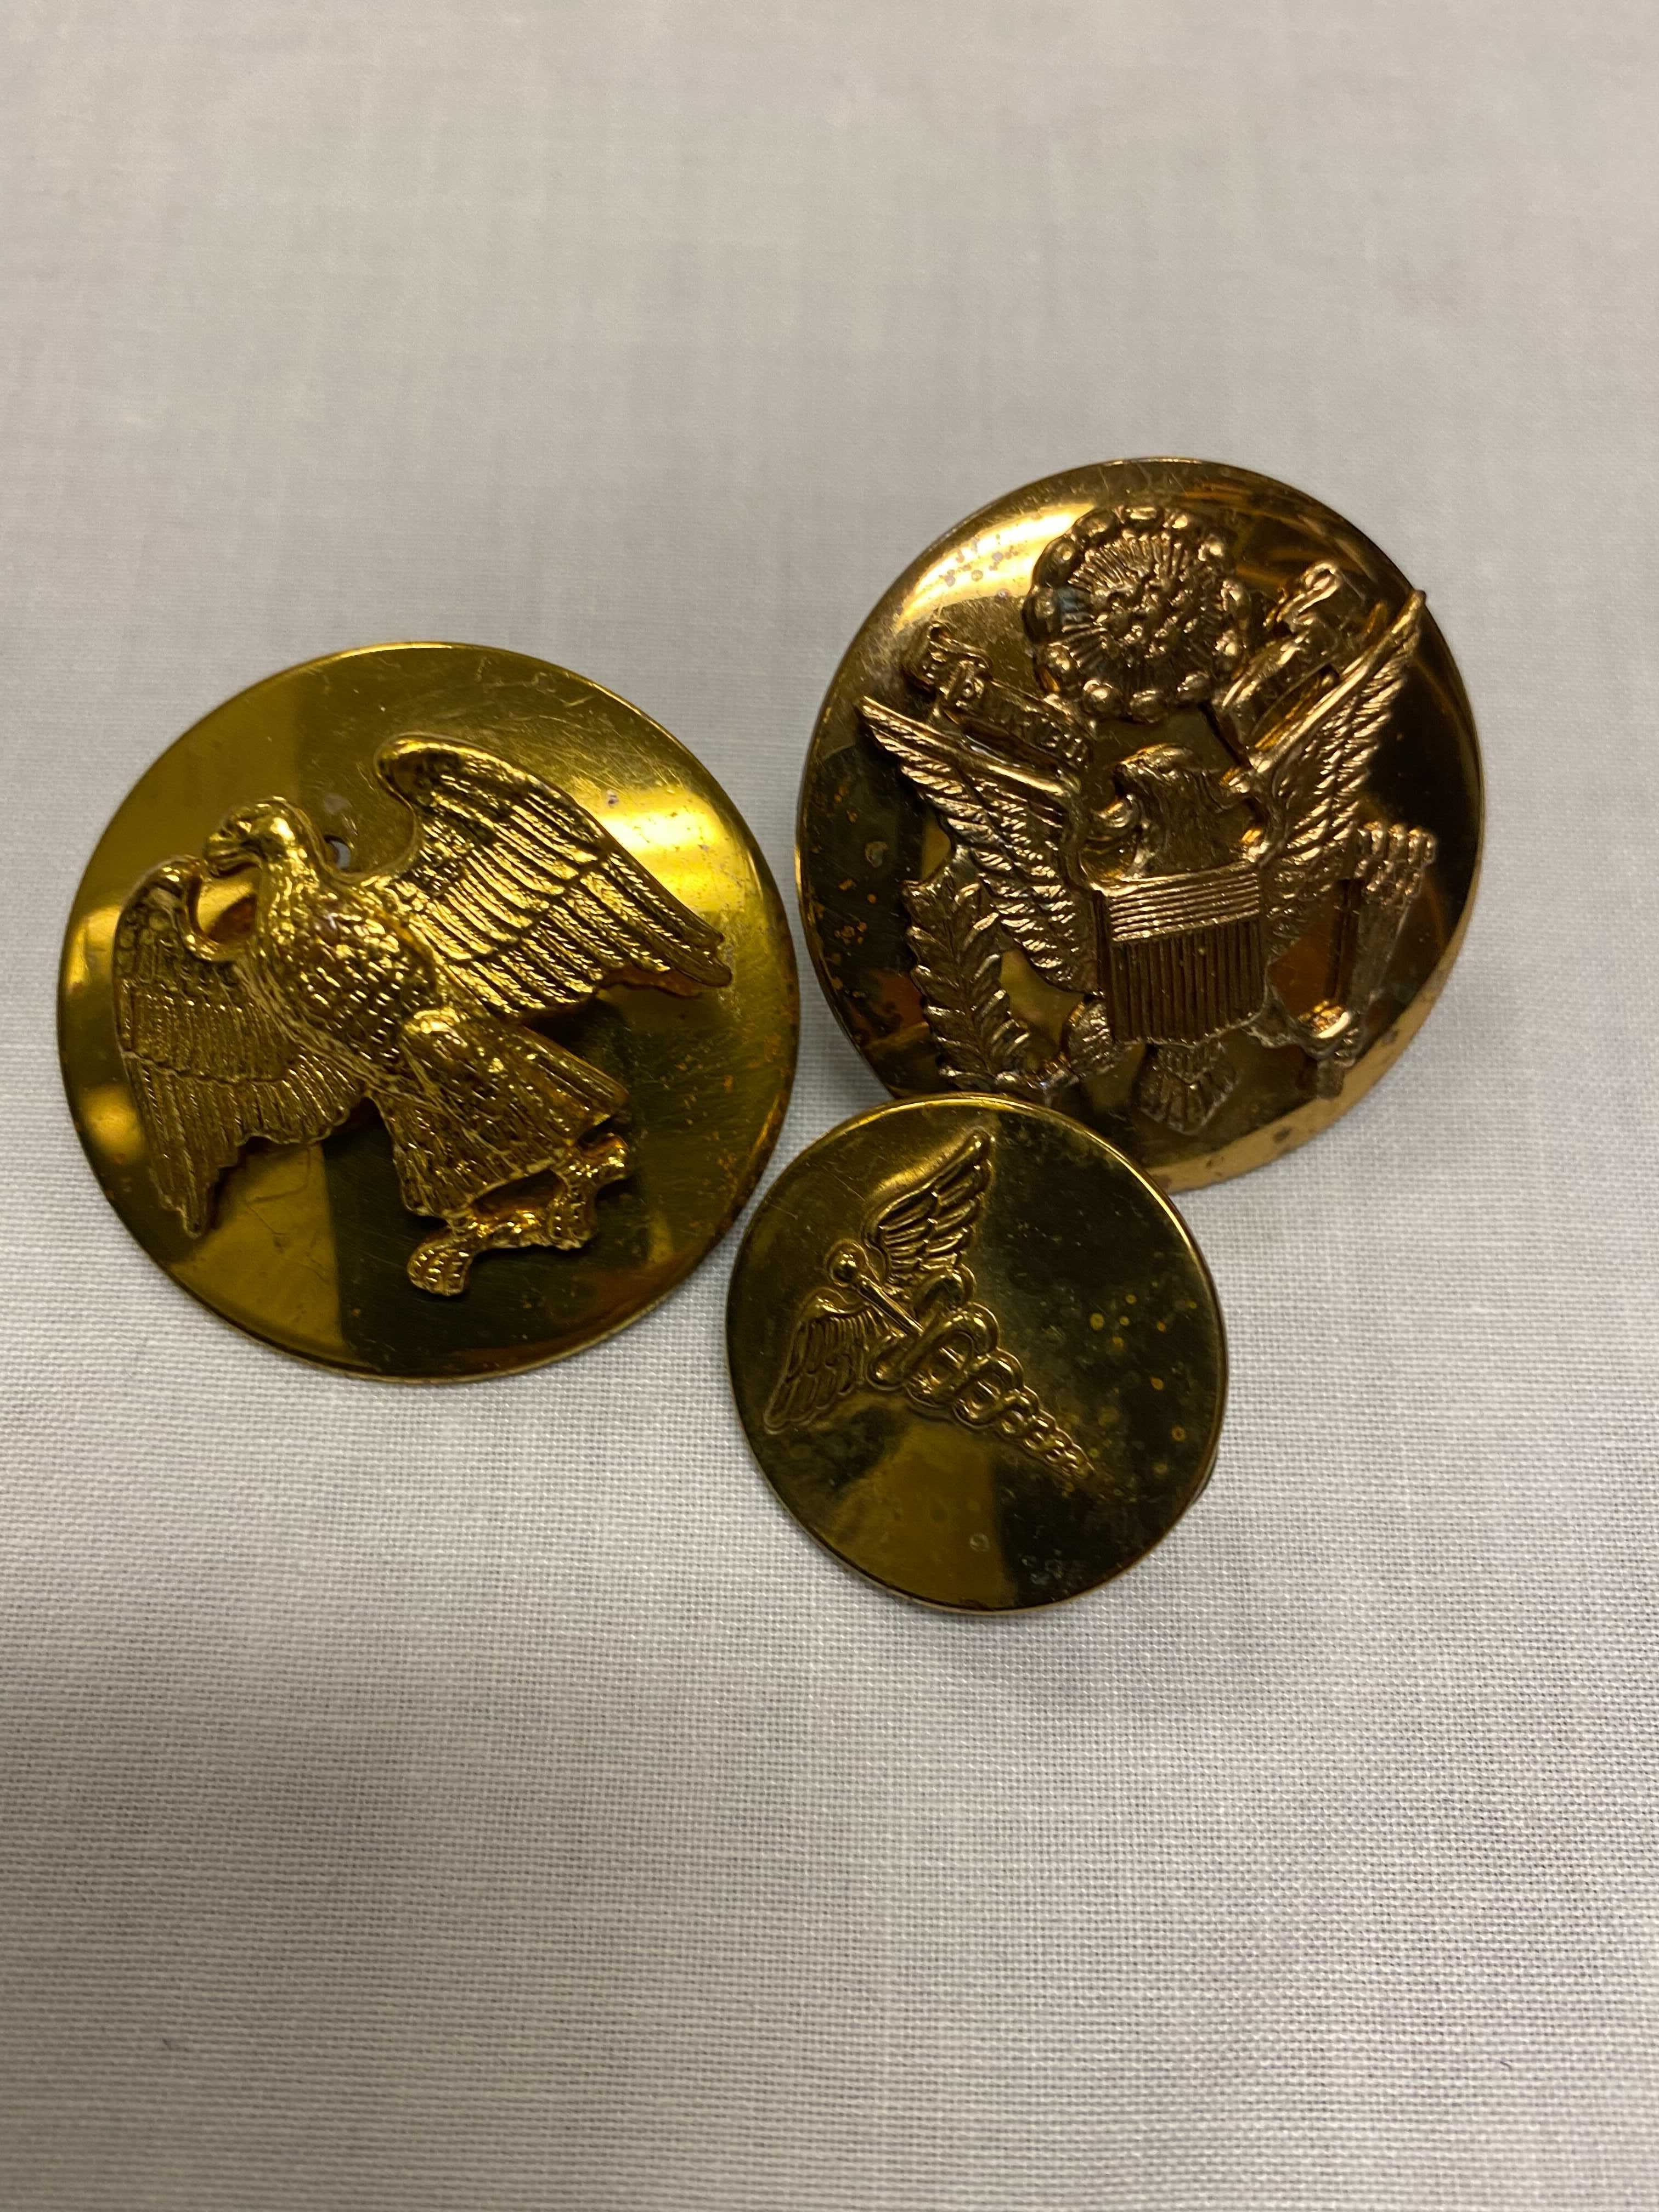 Three brass pills and badges, one with an eagle, another with an eagle and crest, and finally a smaller pin of the medical symbol, Caduceus.